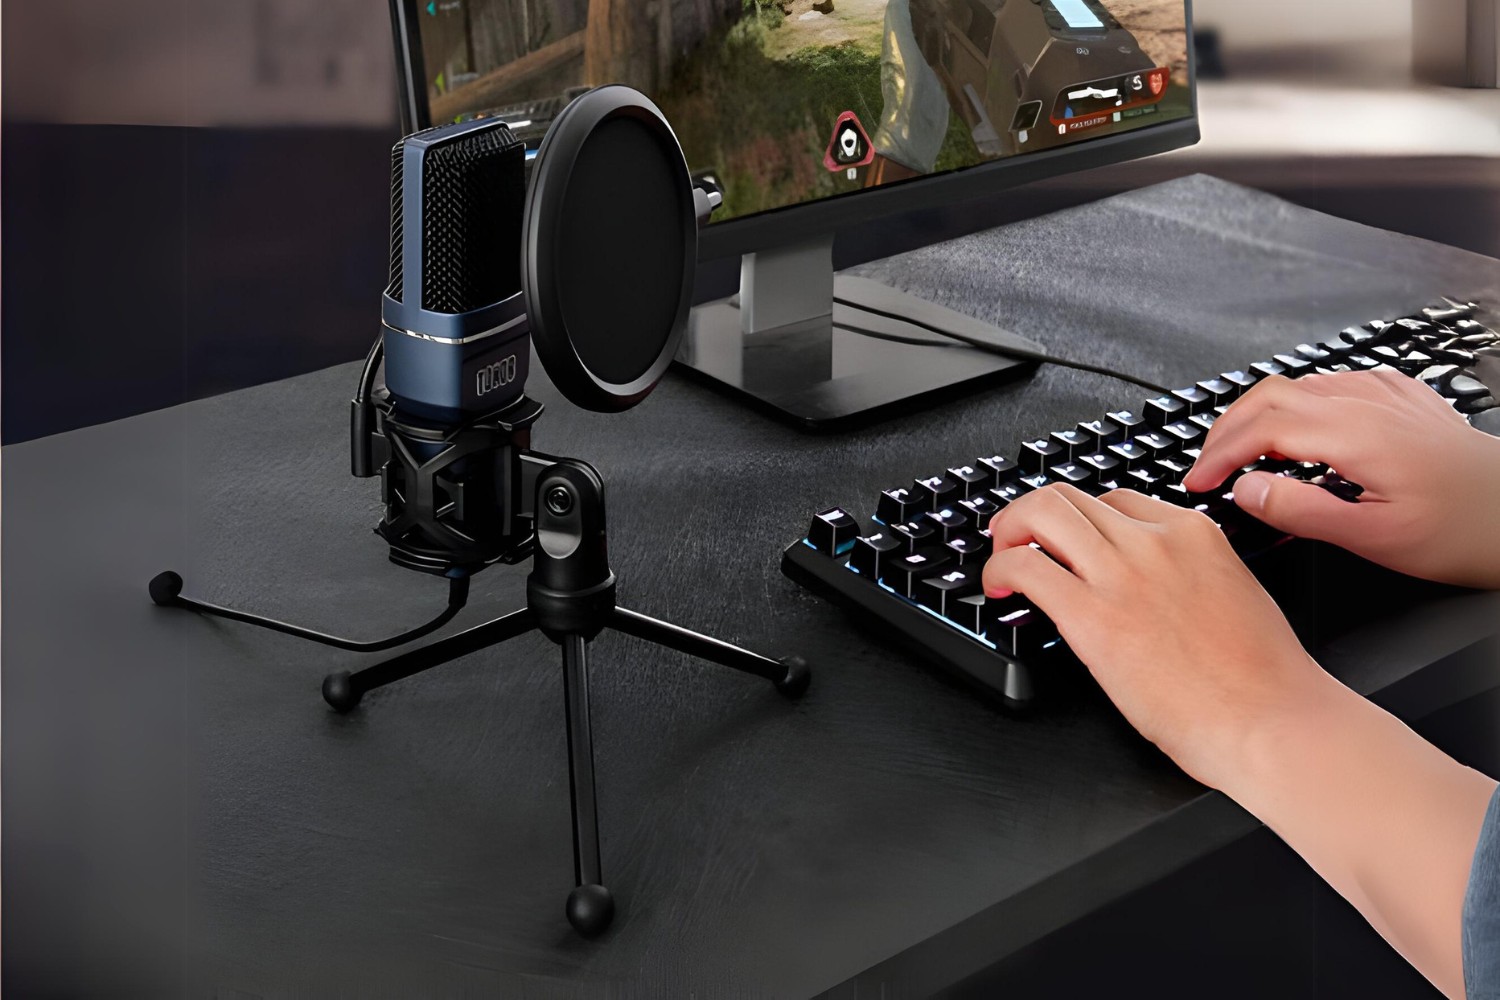 How To Cut Mechanical Keyboard Sound From Mic